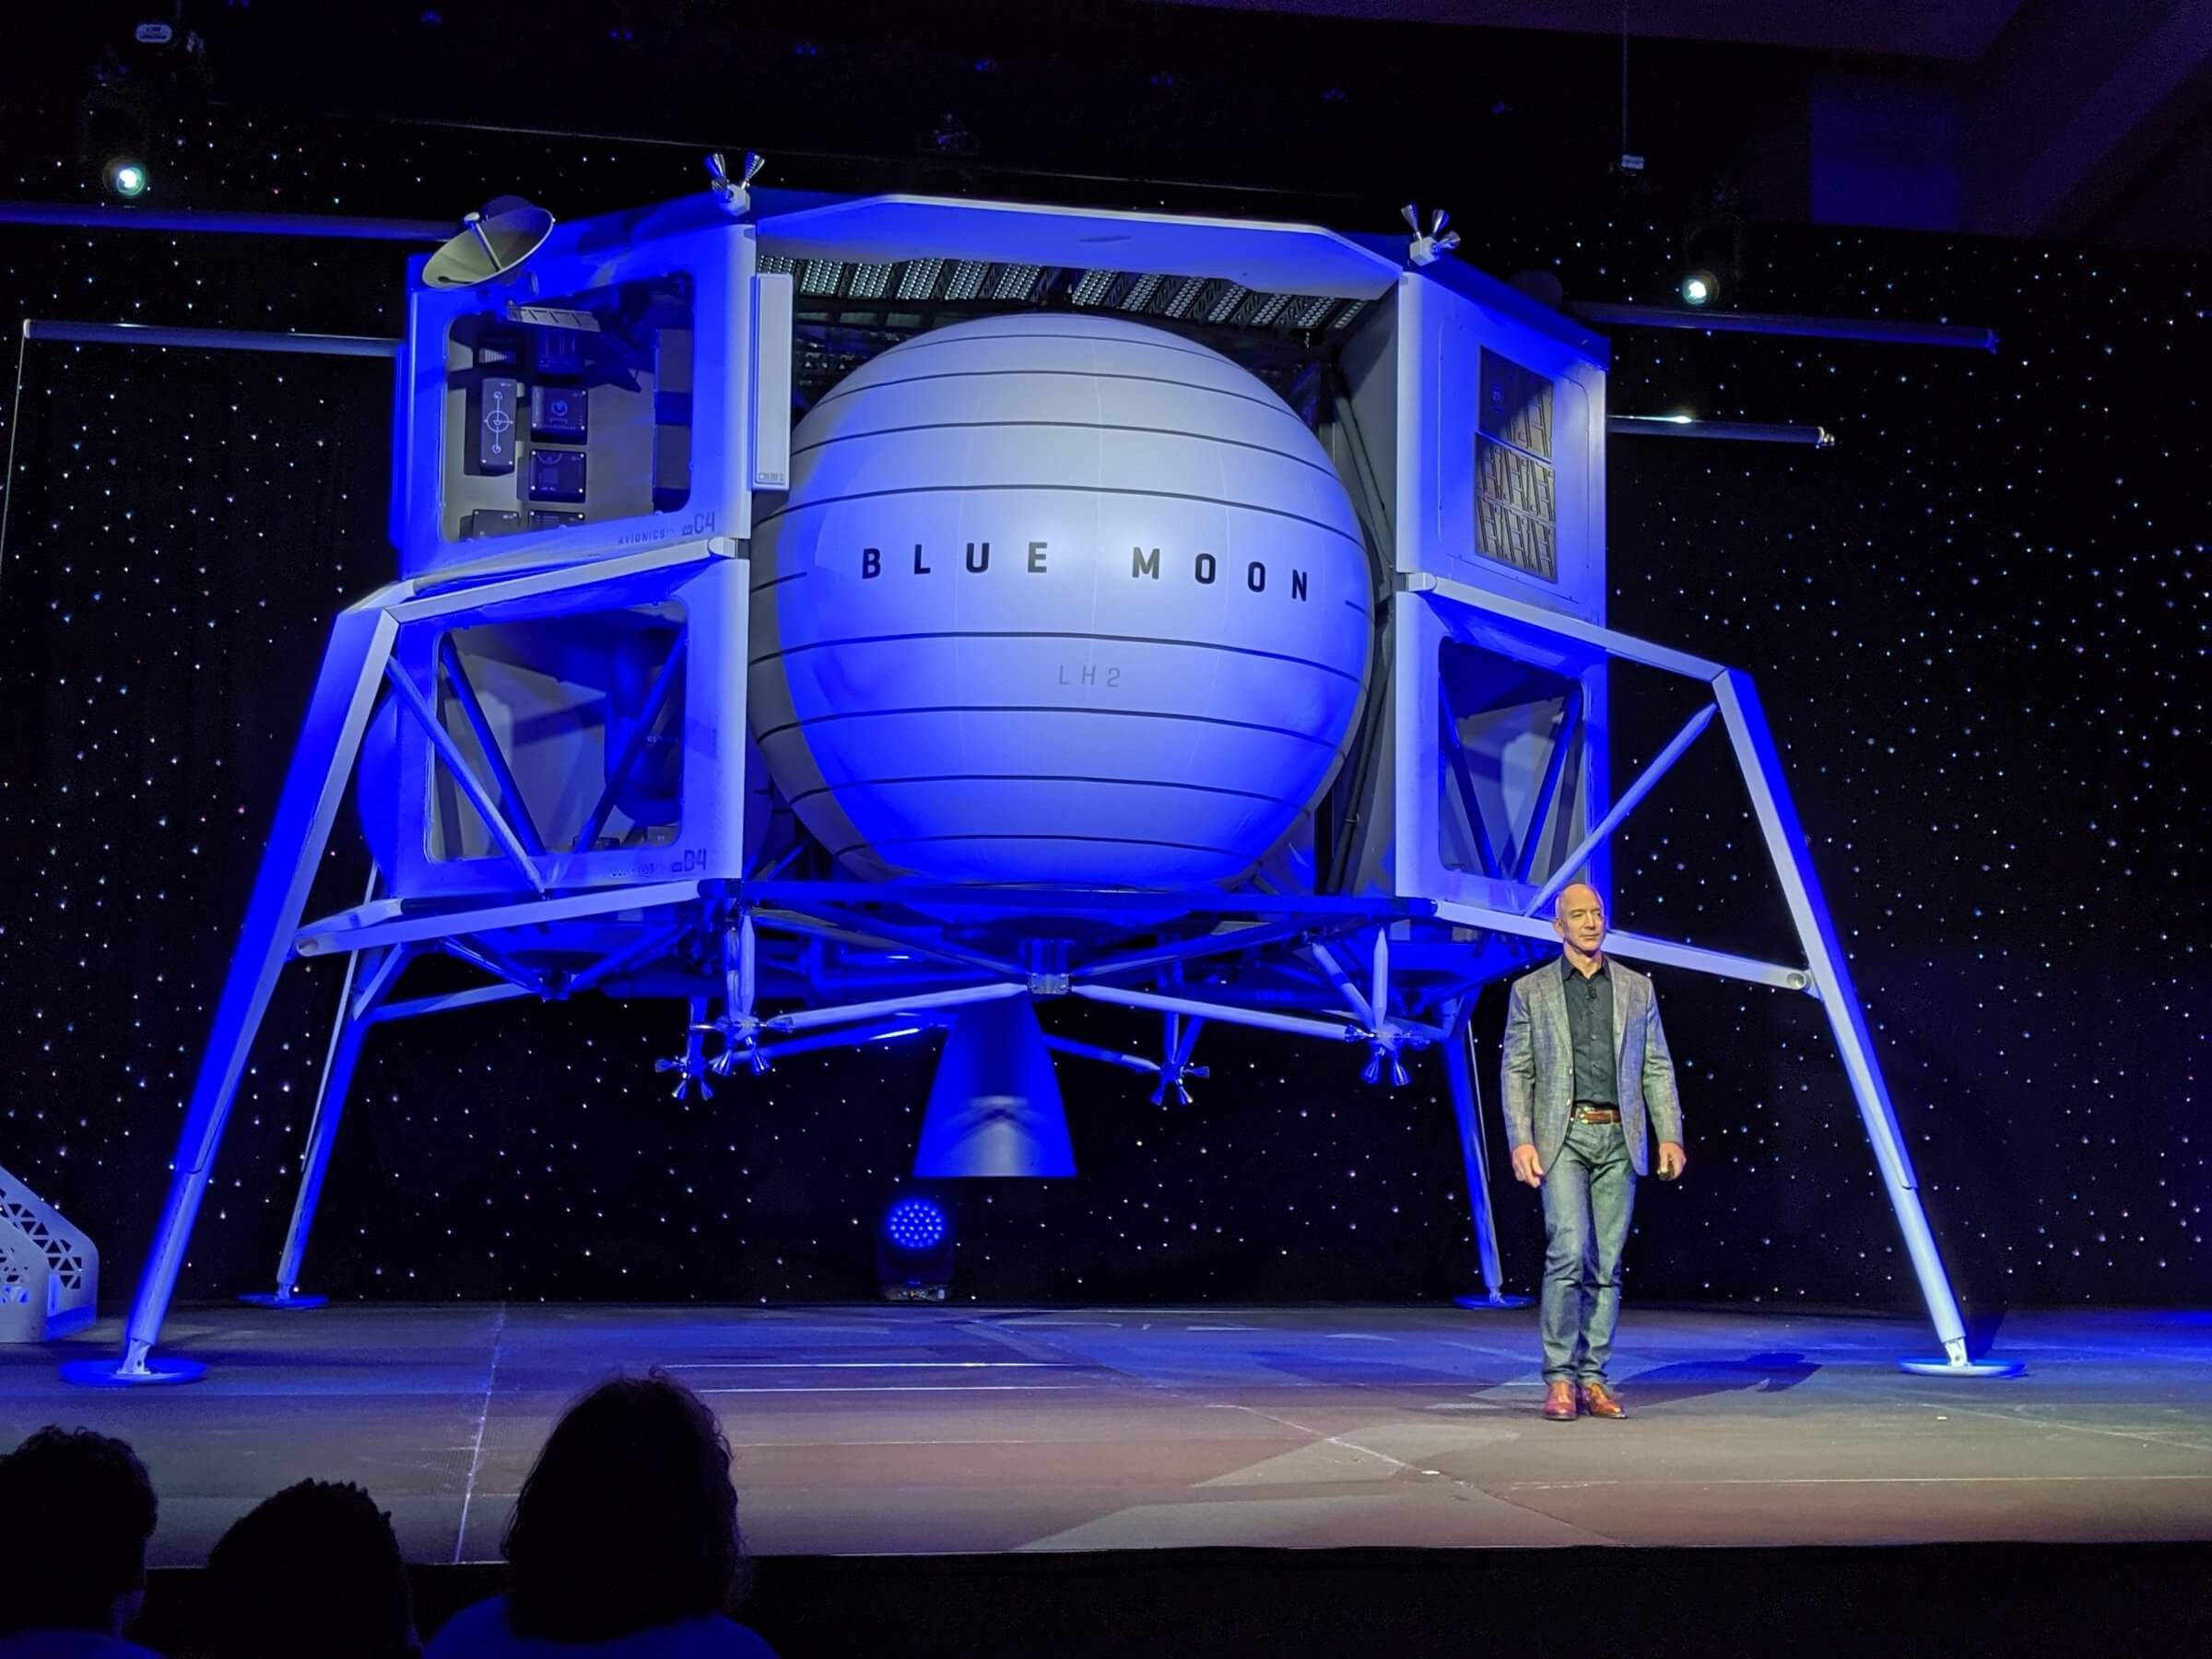 Jeff Bezos introduces Blue Moon and his plans for space colonization